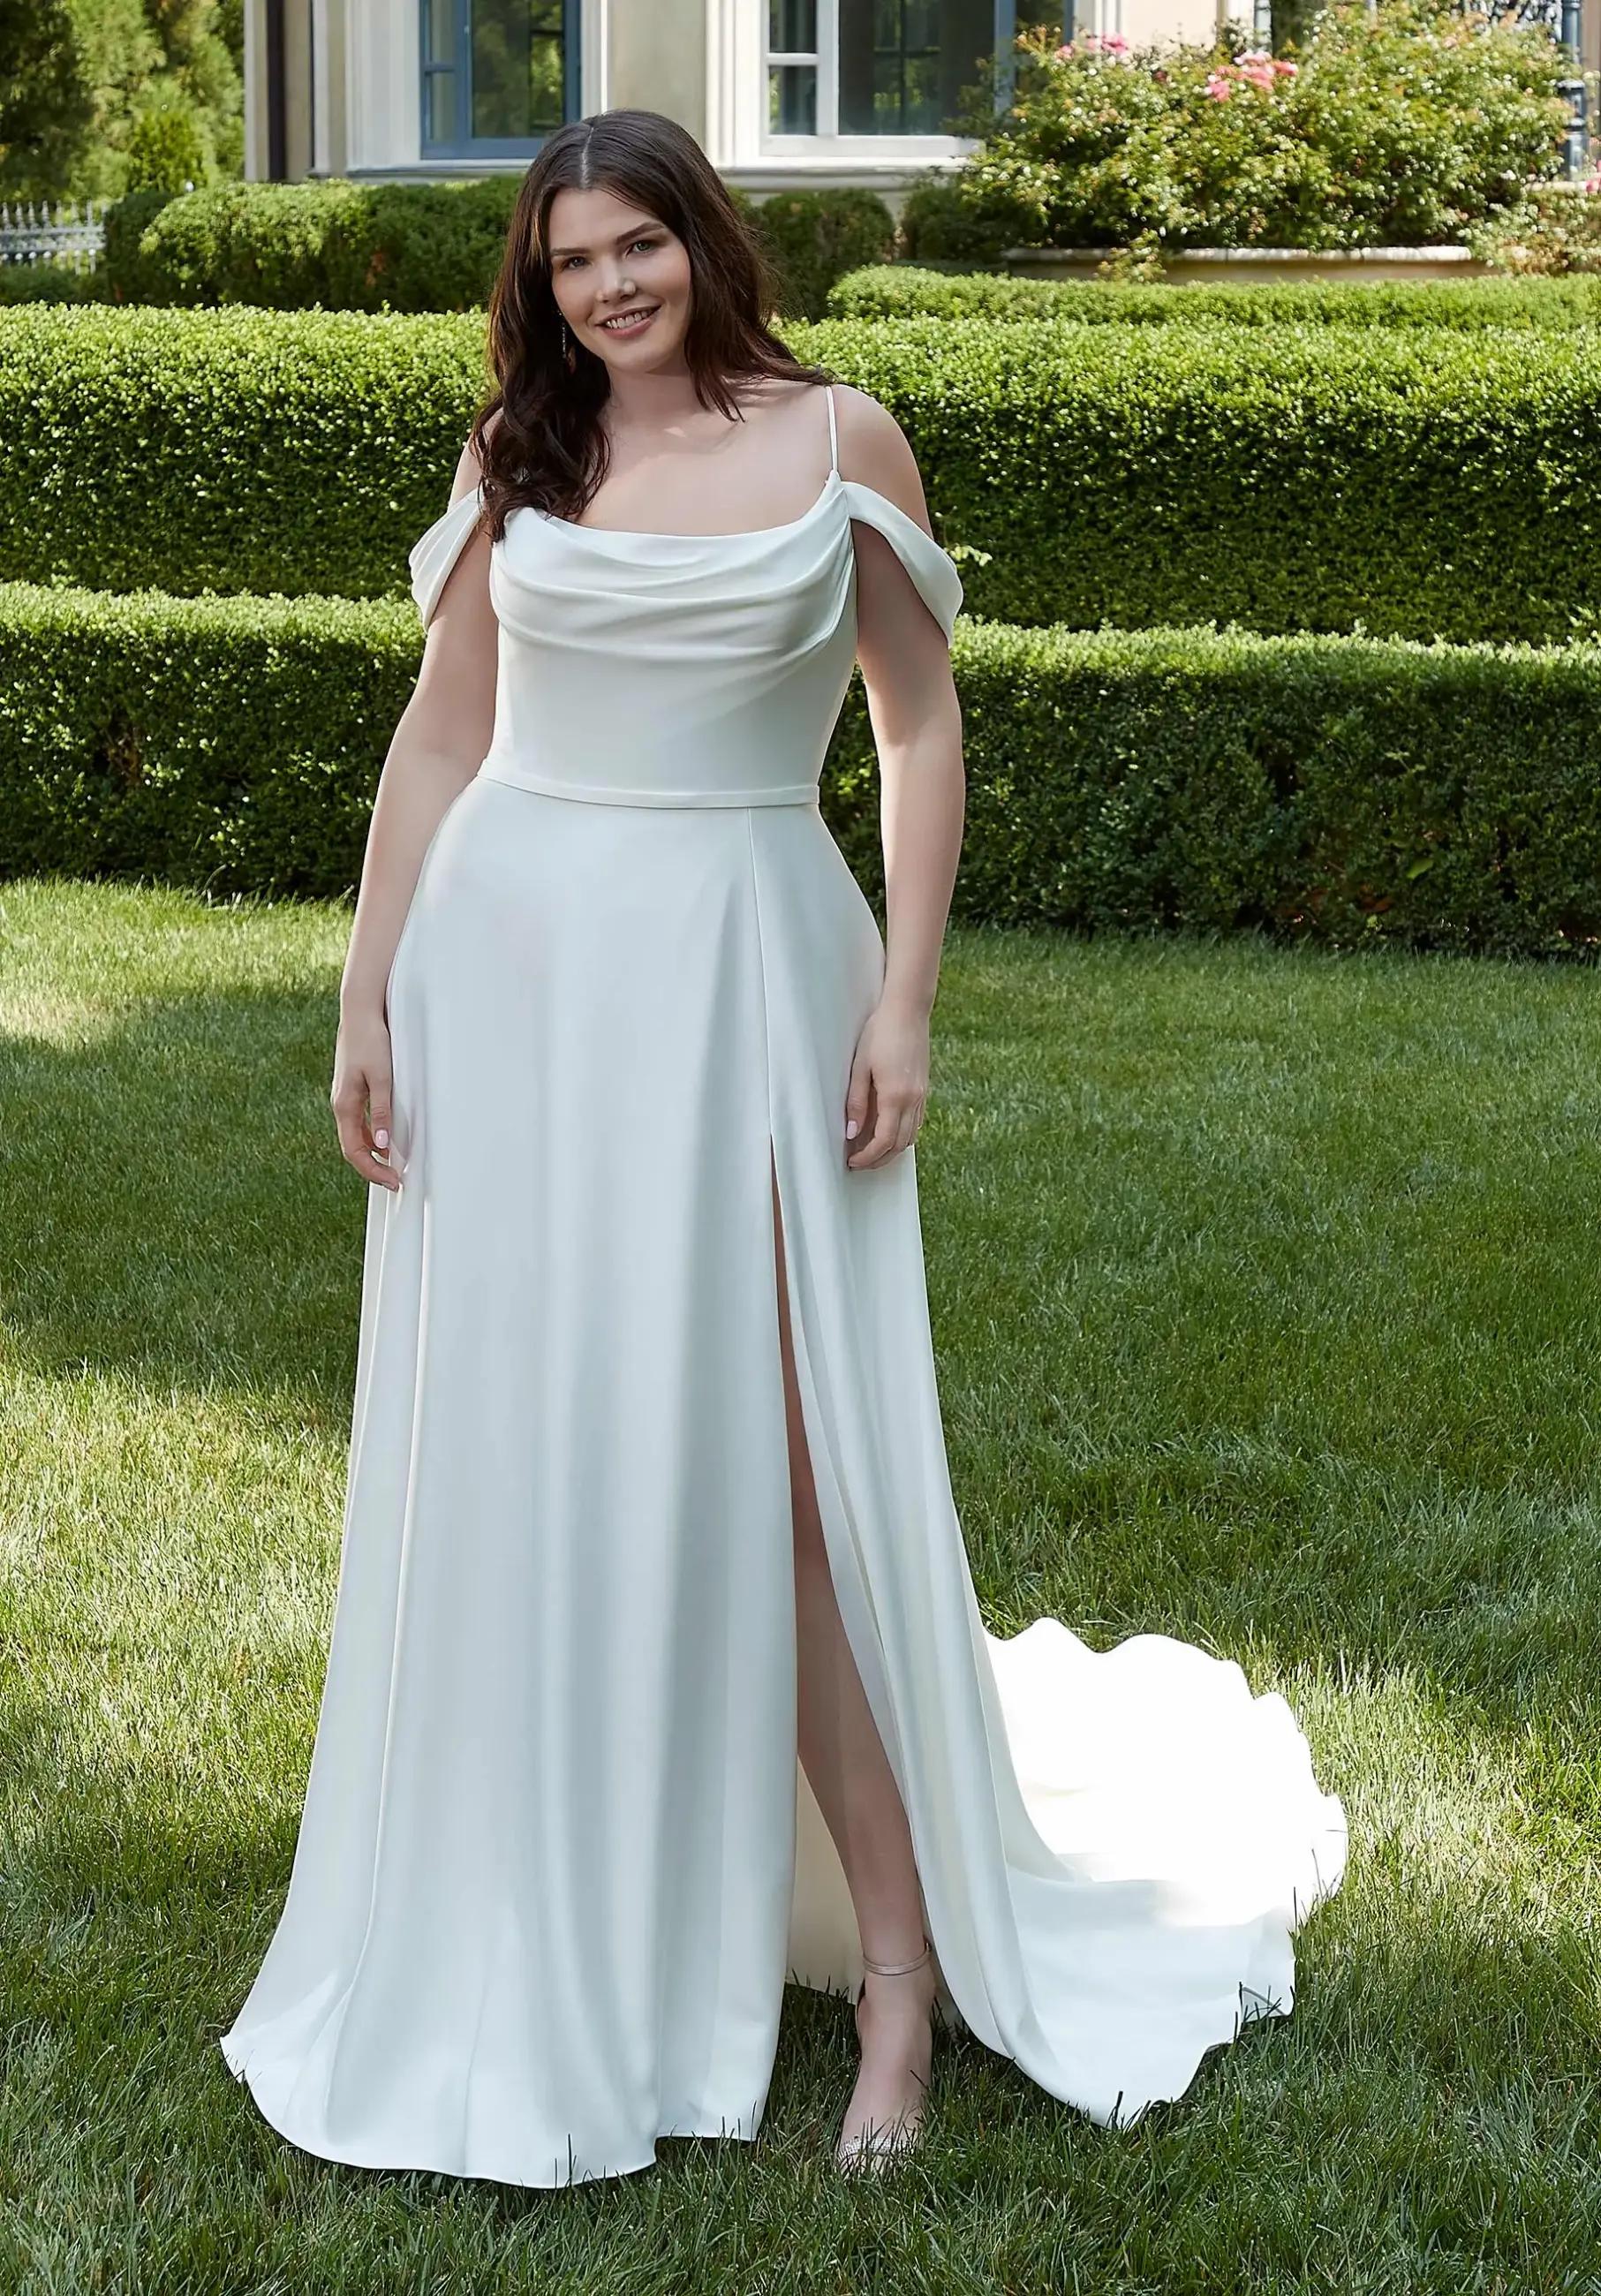 Curvy &amp; Chic: Showcasing the Beauty of Juliette by Morilee Bridal Collection Image